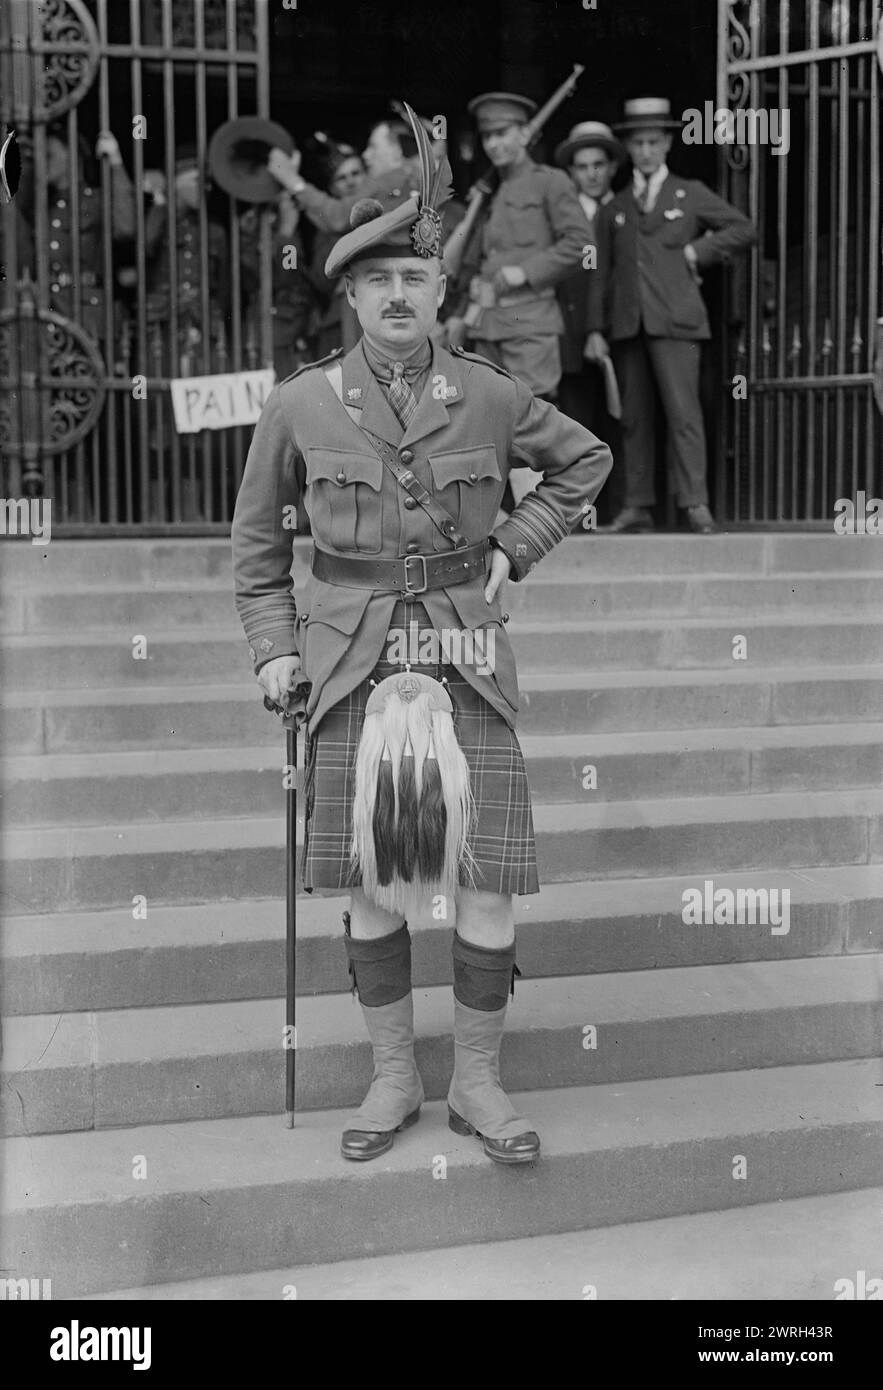 Col. Percy A. Guthrie, July 1917. Colonel Percy Albert Guthrie (1884-1948) on the steps of the 71st Regiment Armory, Park Avenue (between East 33rd and East 34th streets), New York City. Guthrie was the leader of the 236th Canadian Infantry (the Maclean Highlanders) who were in the United States in July of 1917 for &quot;British Recruiting Week&quot; which encouraged enlistment in World War I. Stock Photo